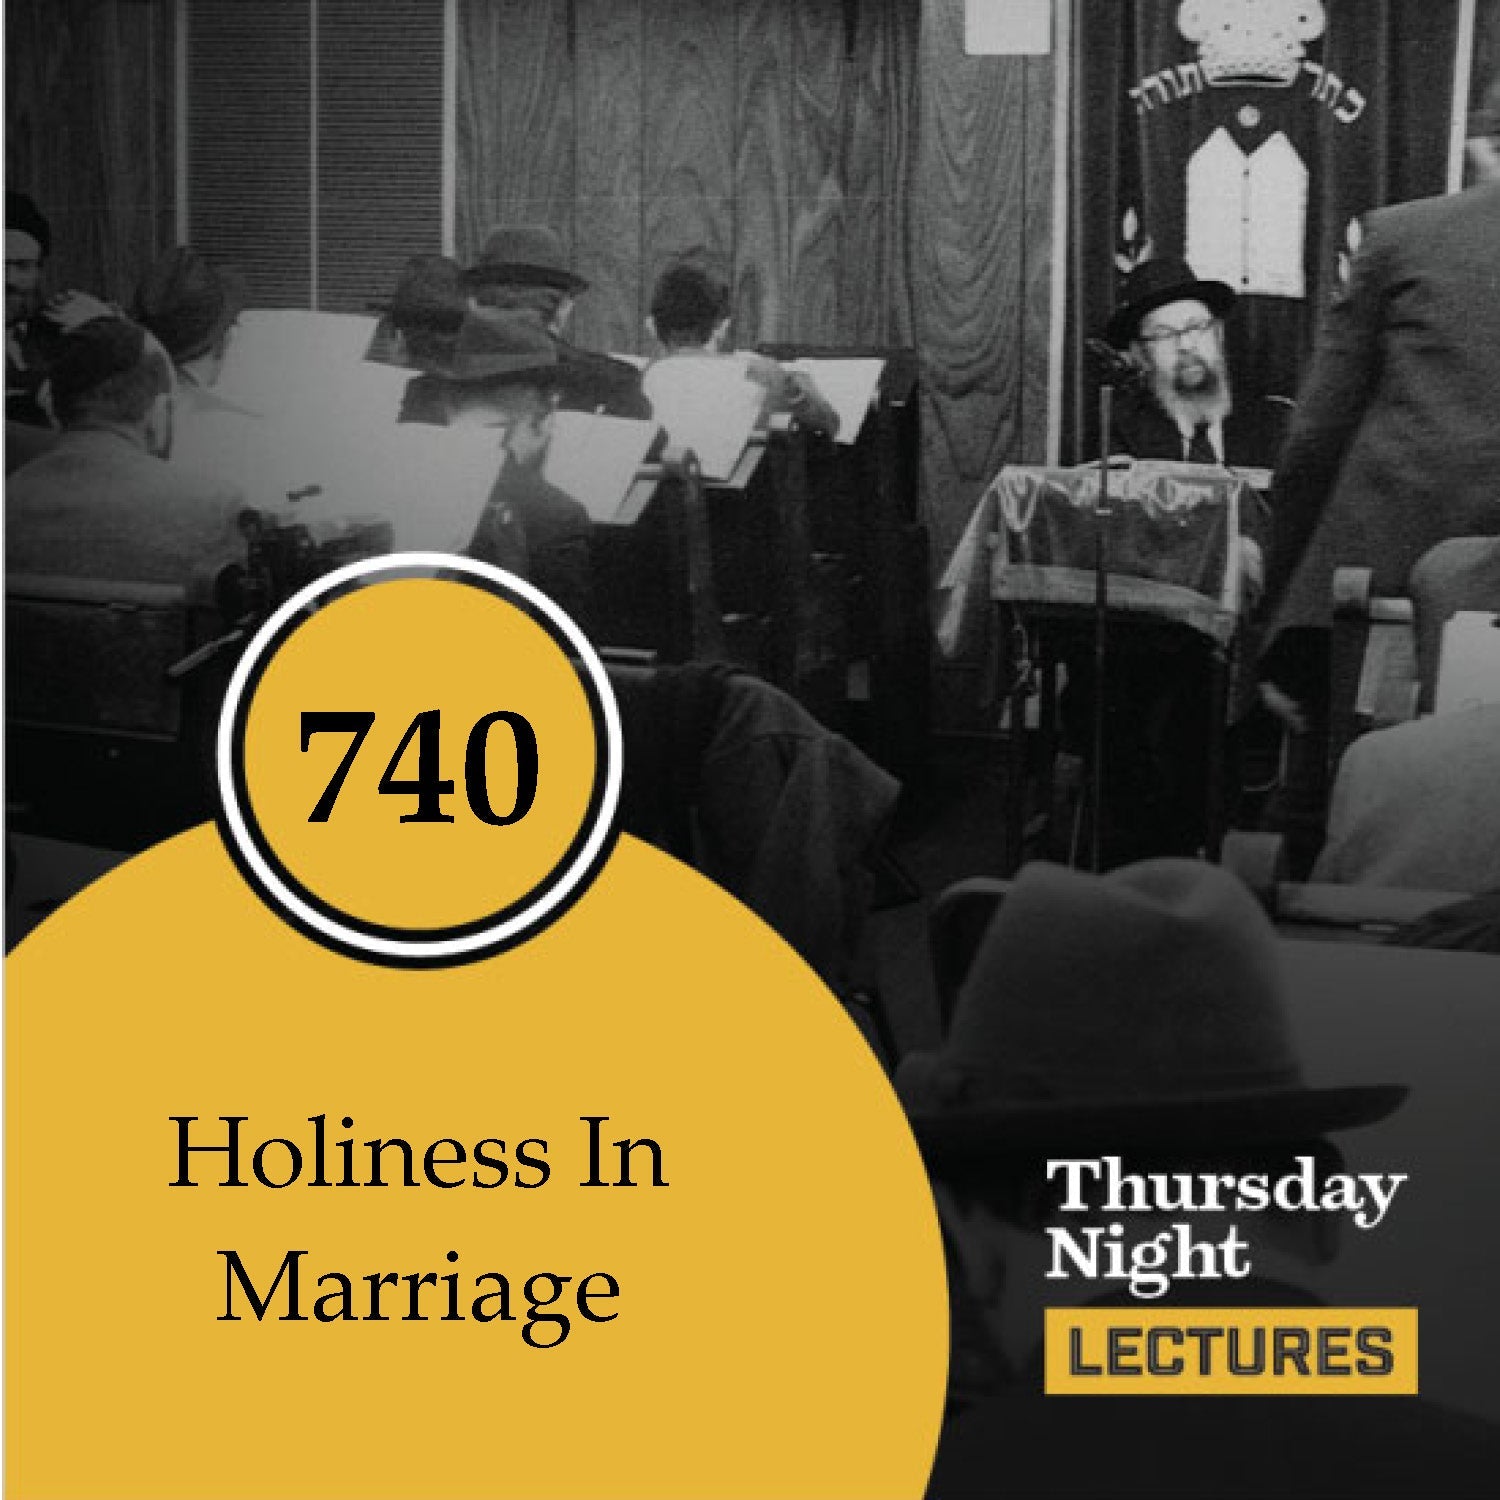 740 - Holiness In Marriage